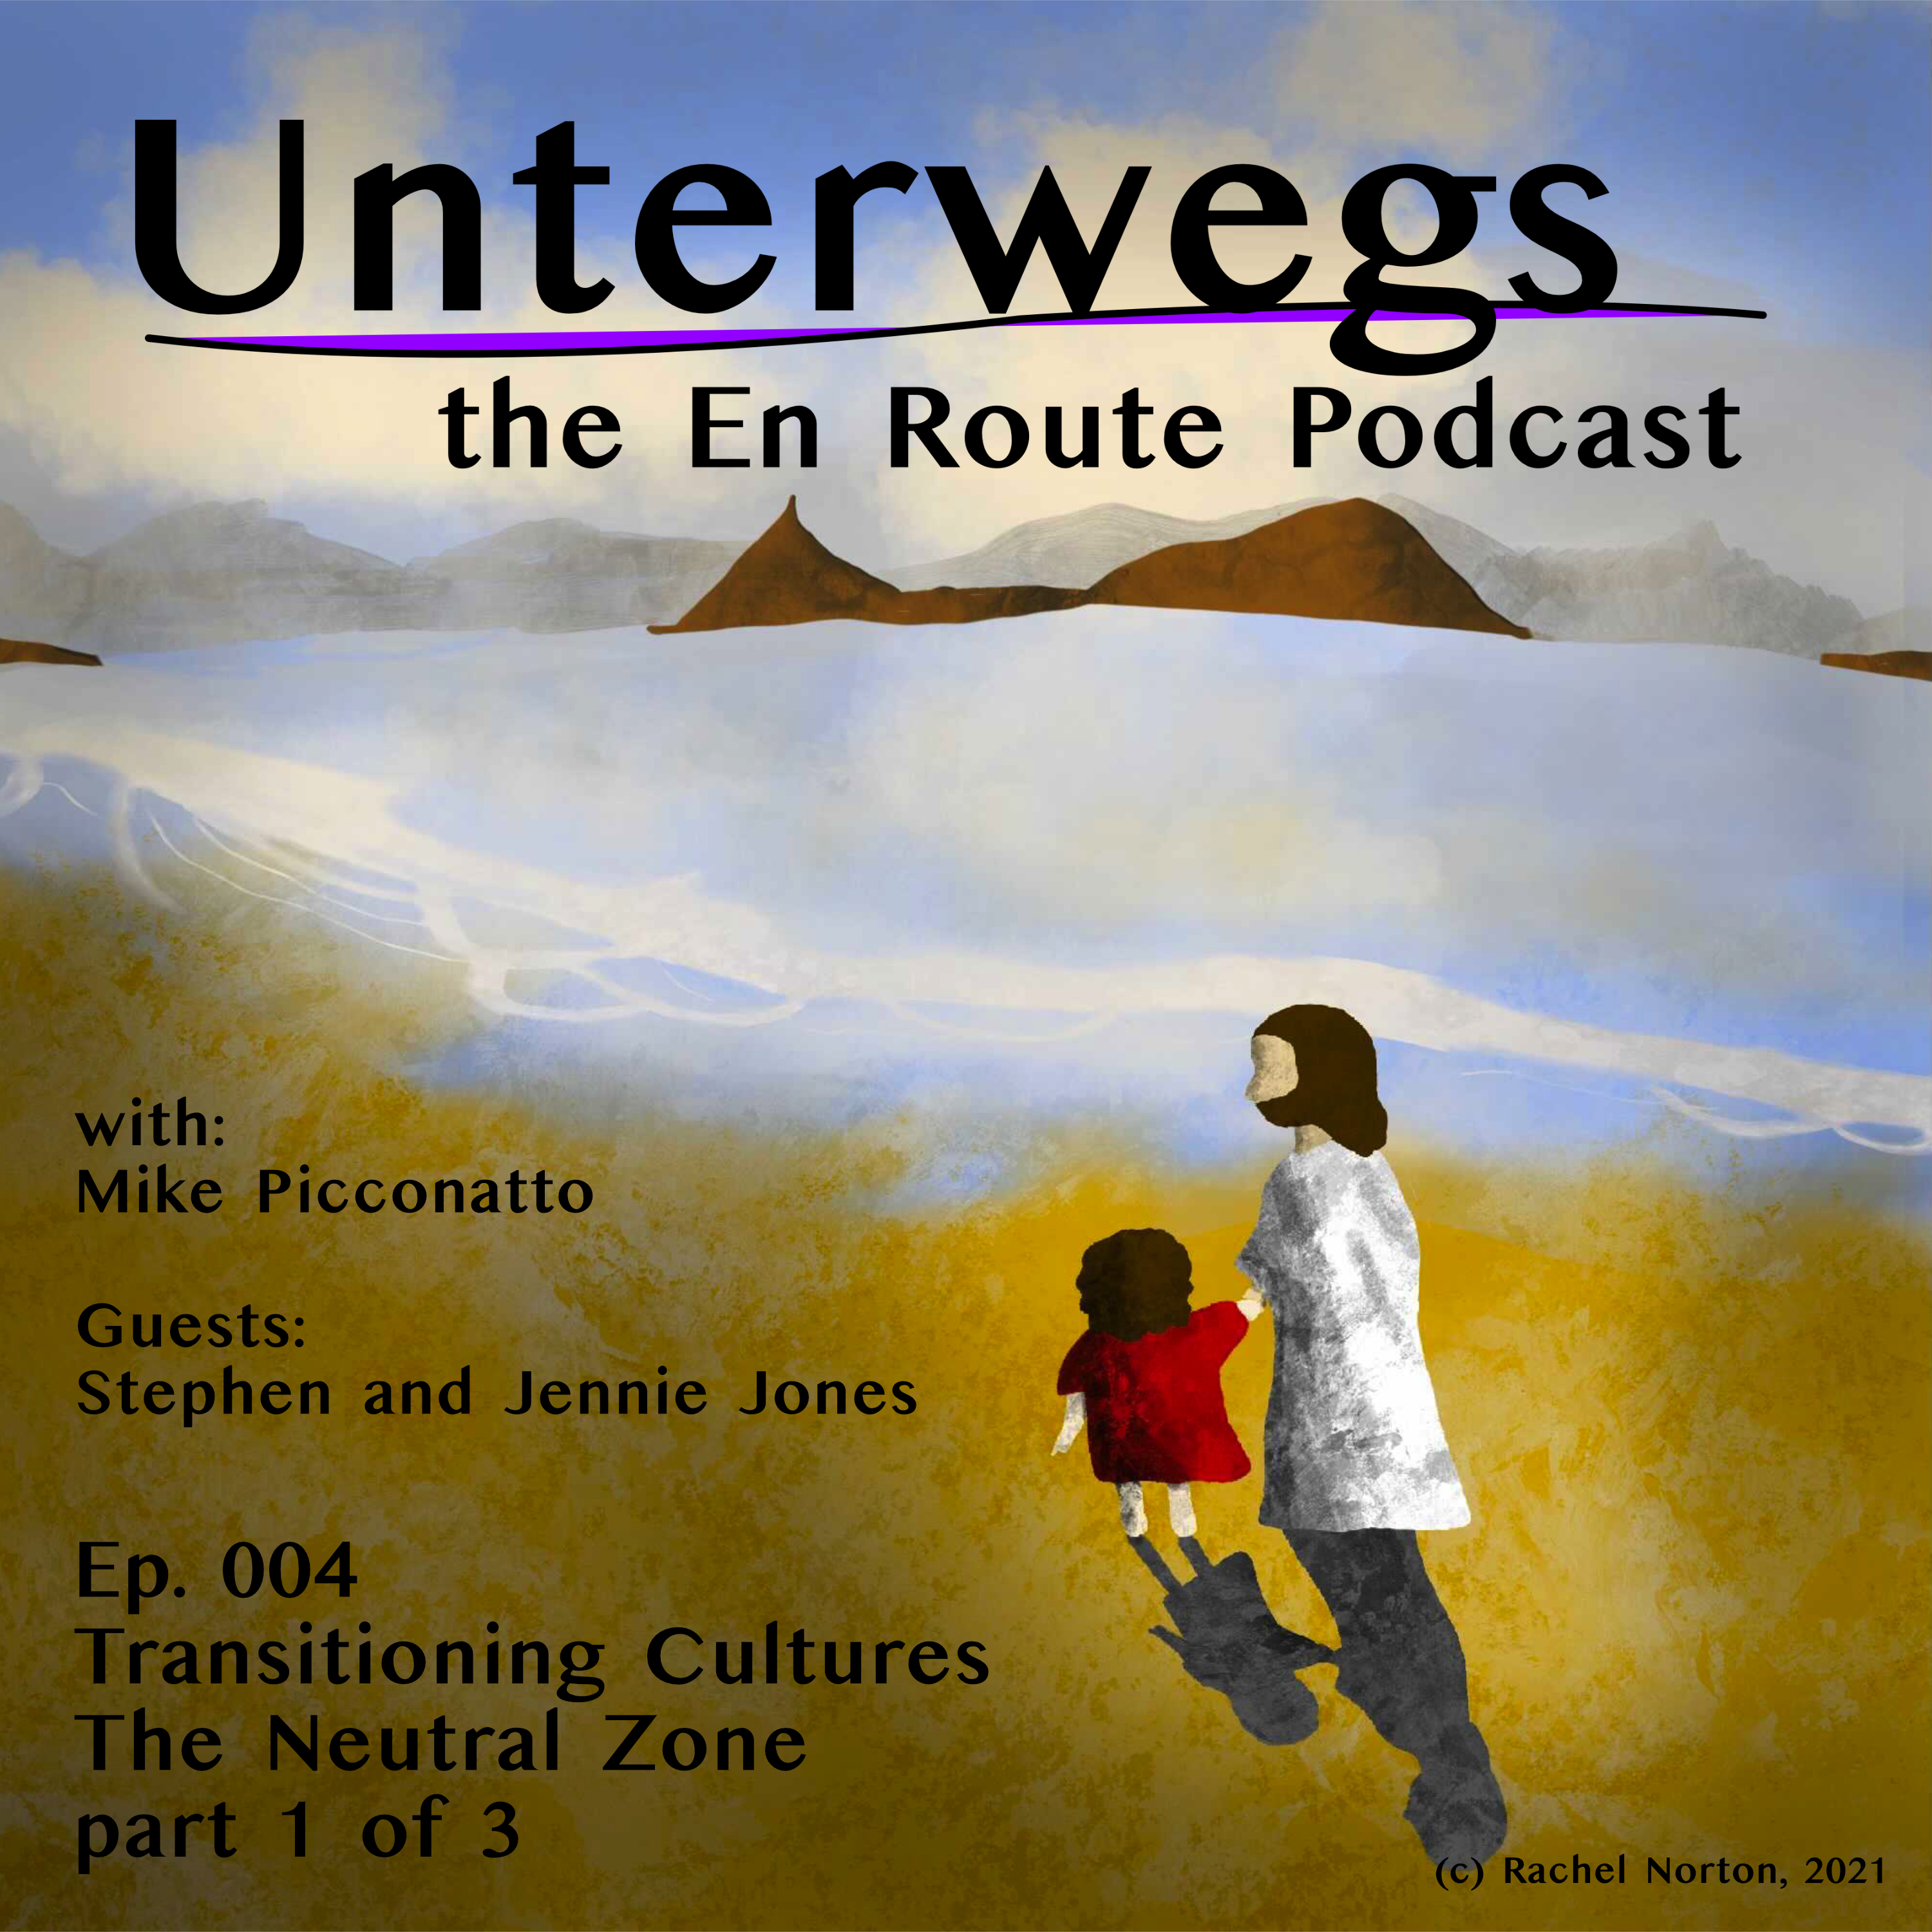 Episode 004 - The Neutral Zone - part 1 of 3